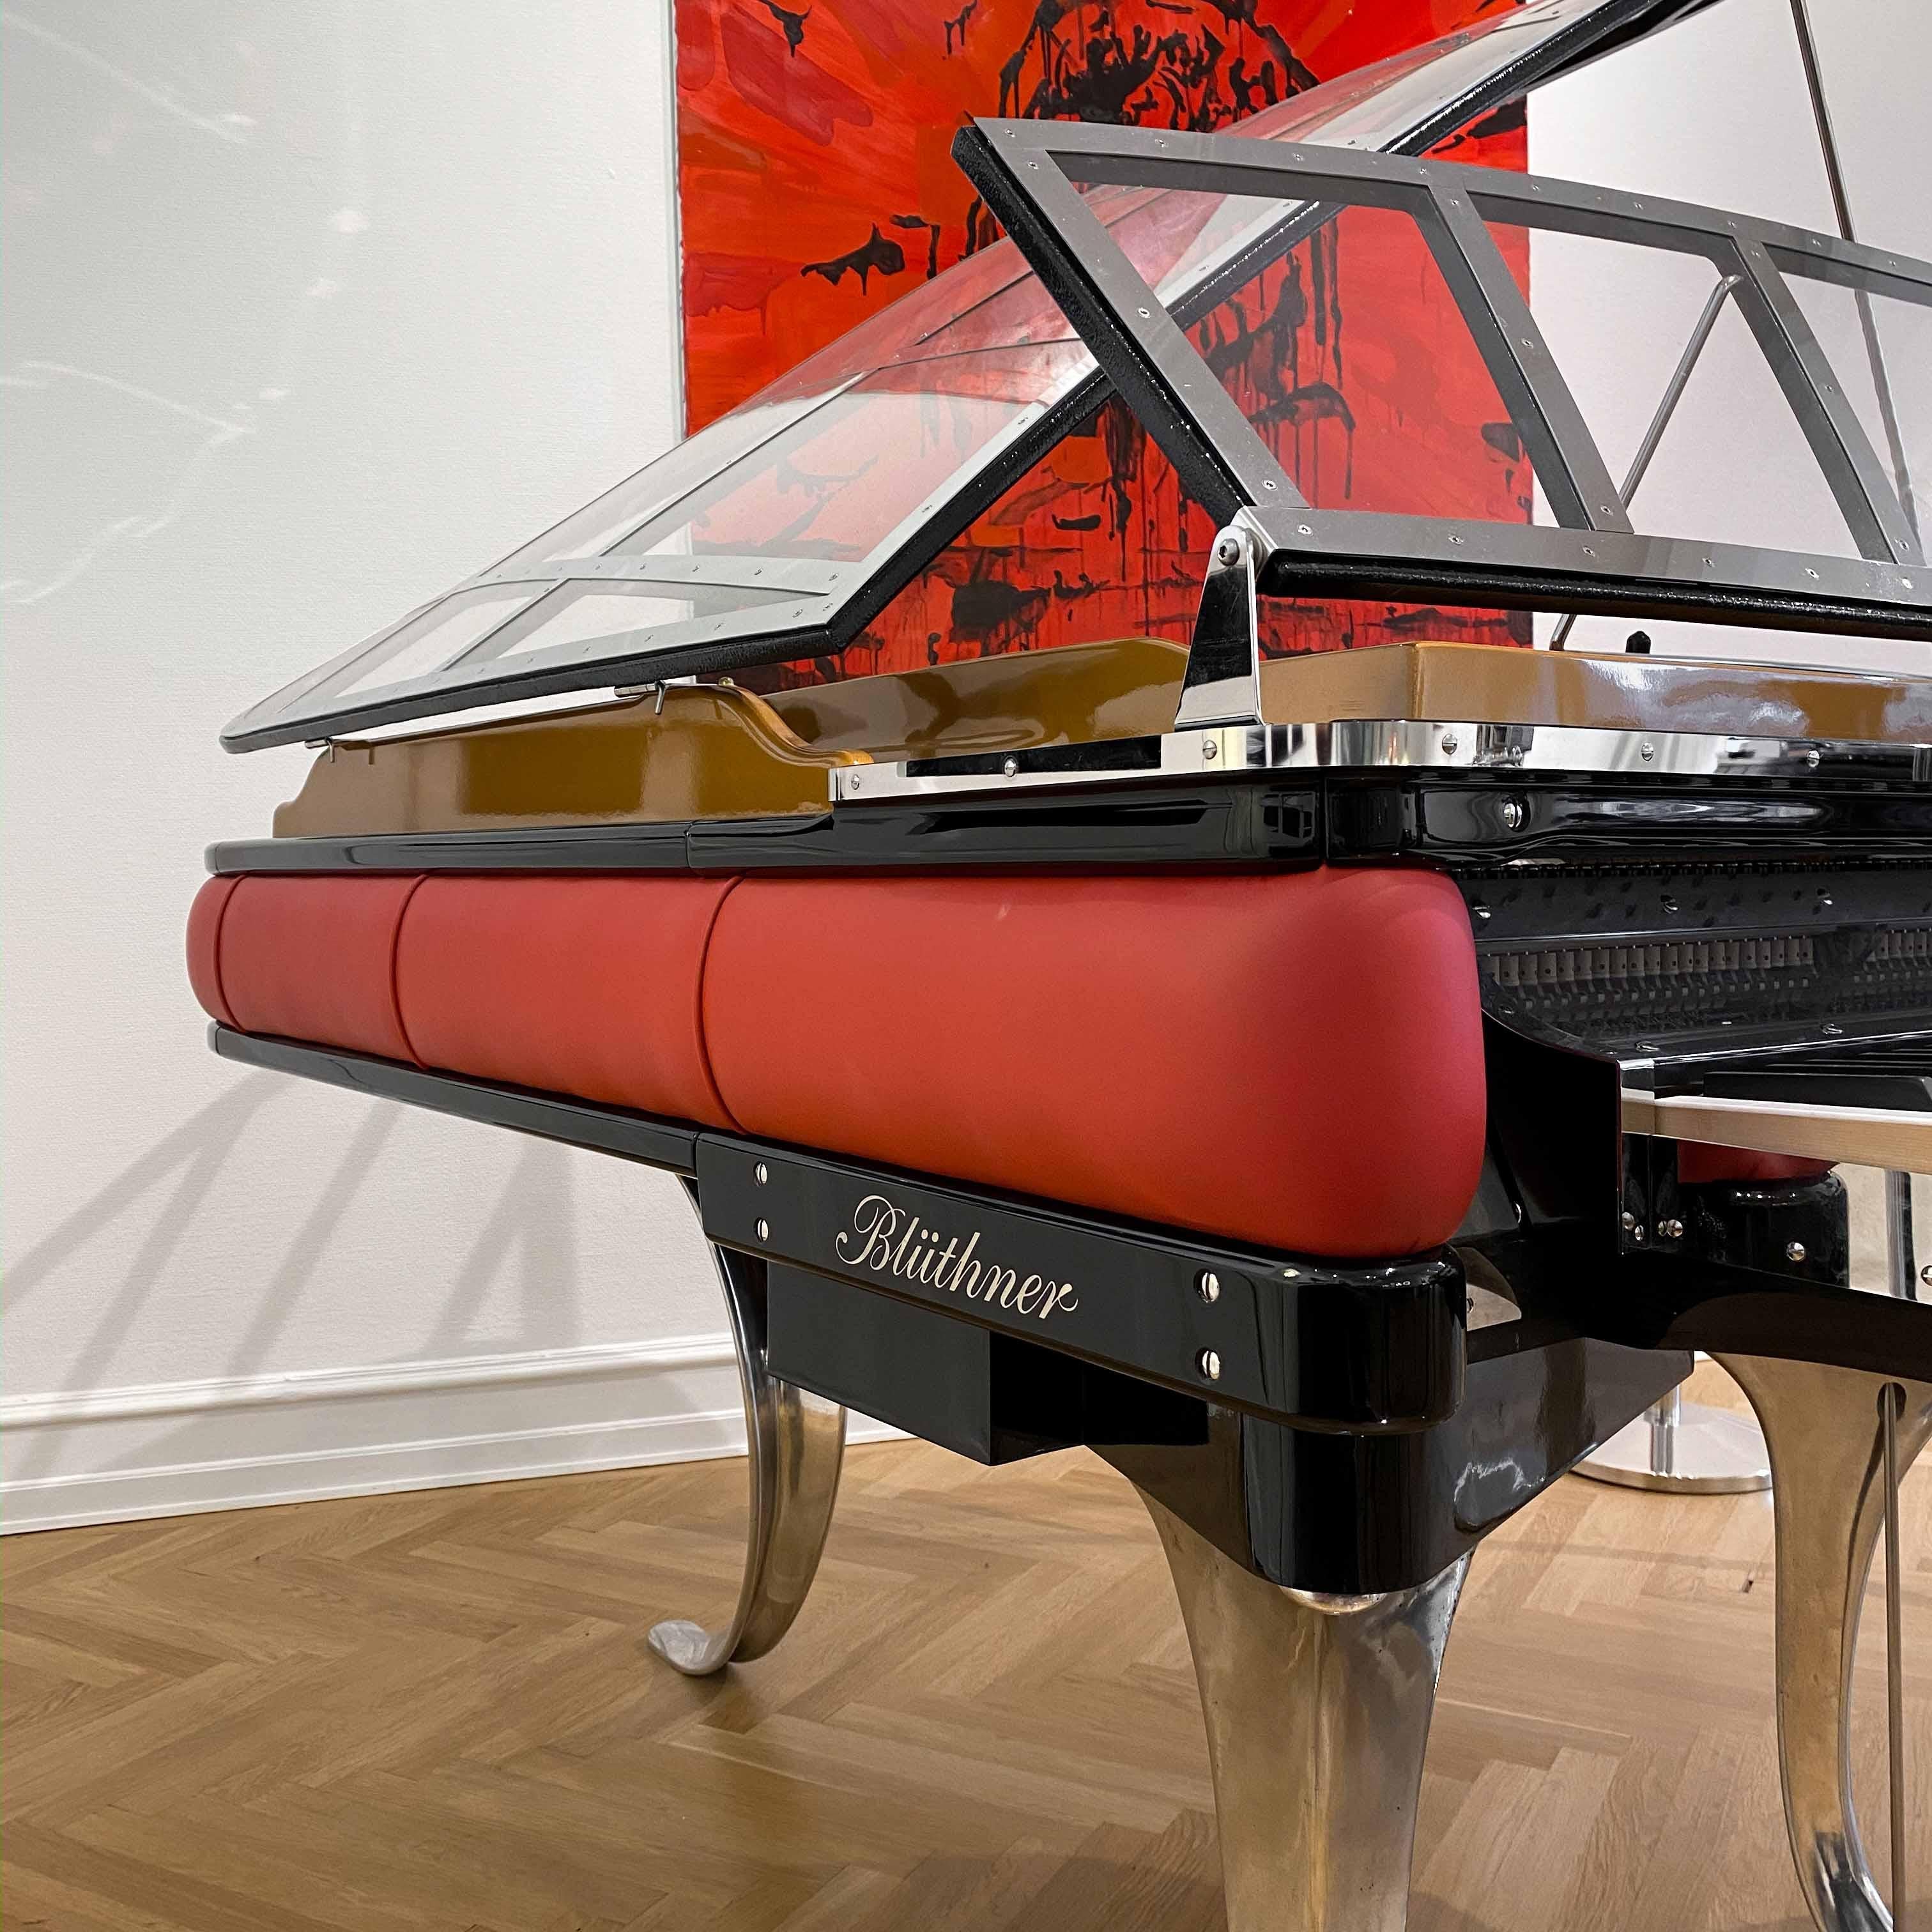 Bauhaus PH Grand Piano PH186 Excellence, Red Leather and Chrome Lid, Modern, Sculptural For Sale